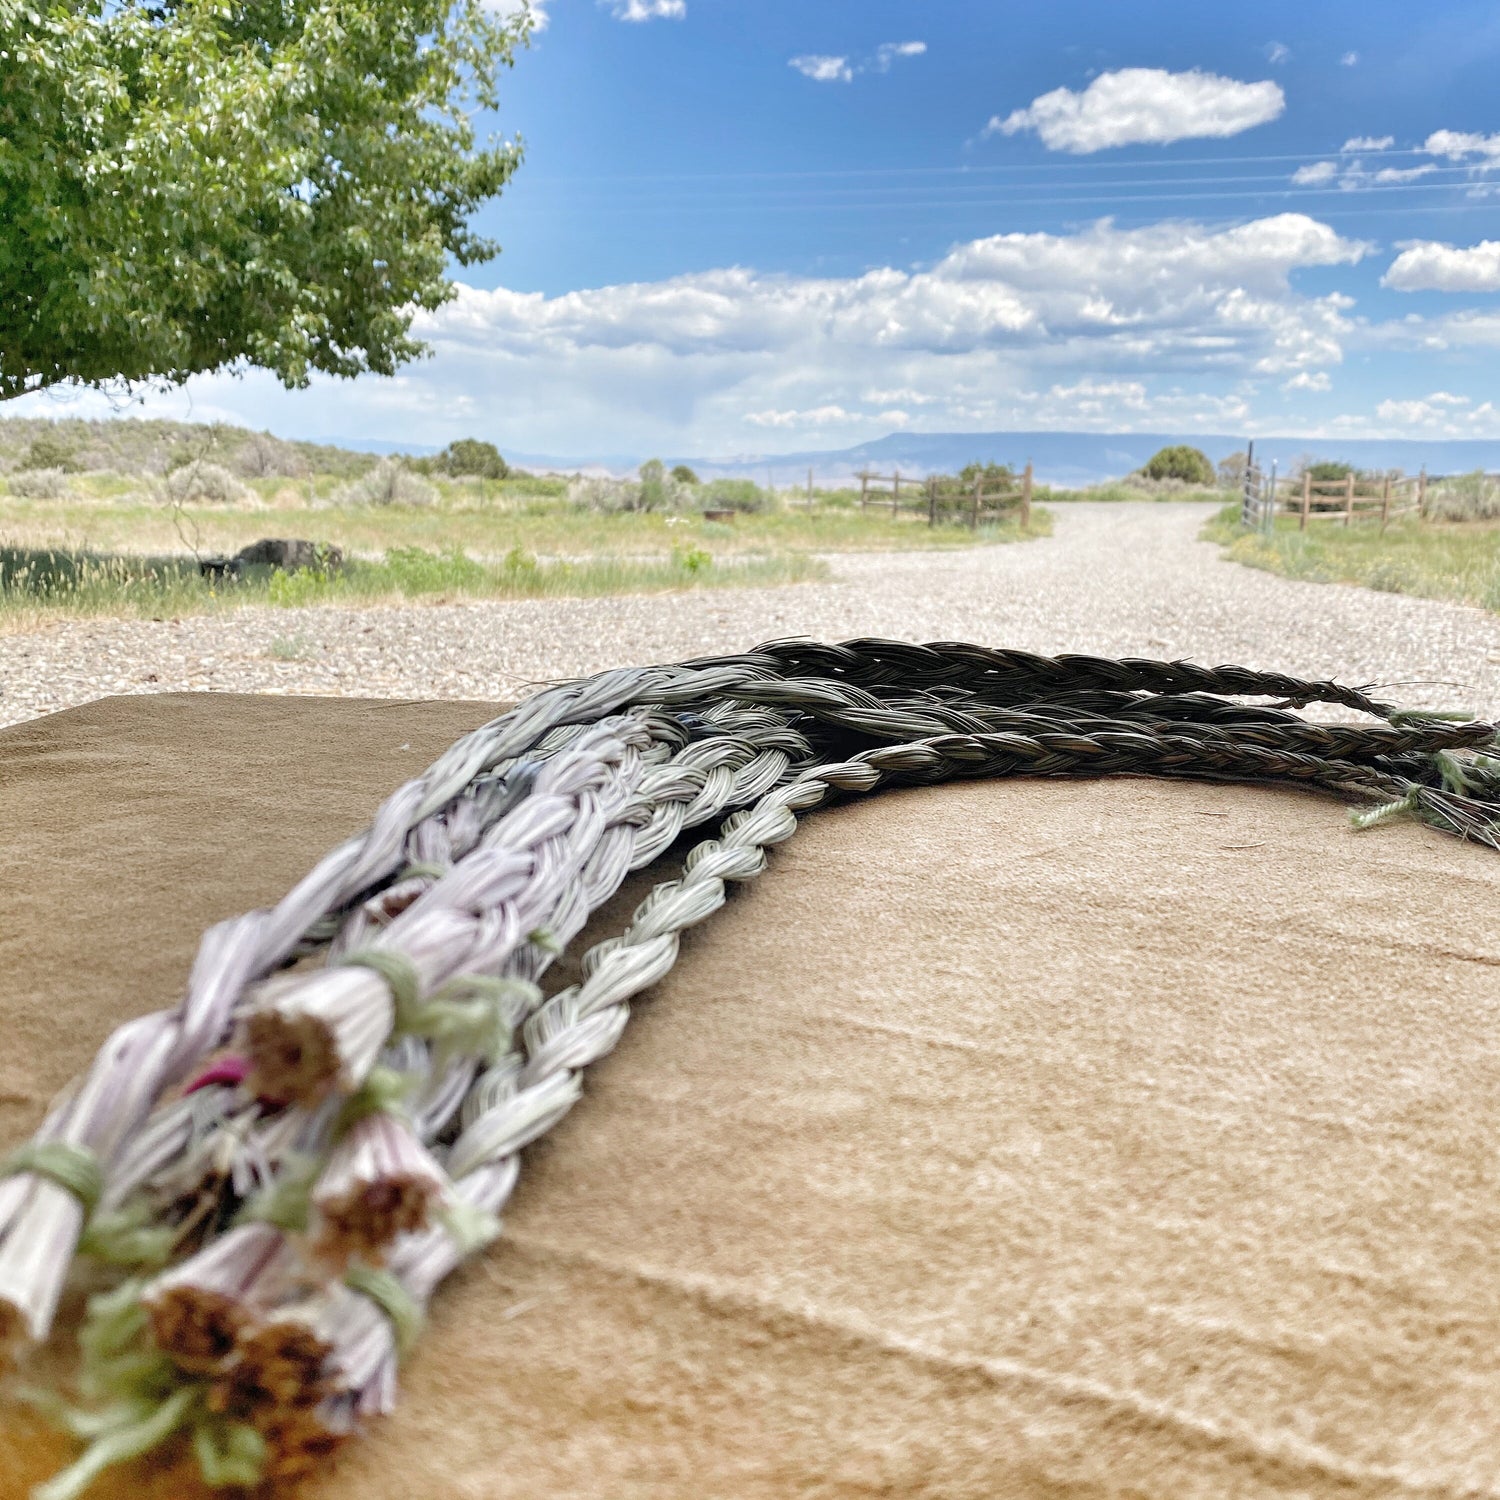 Arranged Sweetgrass braids on a rustic blanket, a testament to Sacred Plant Co Farm&